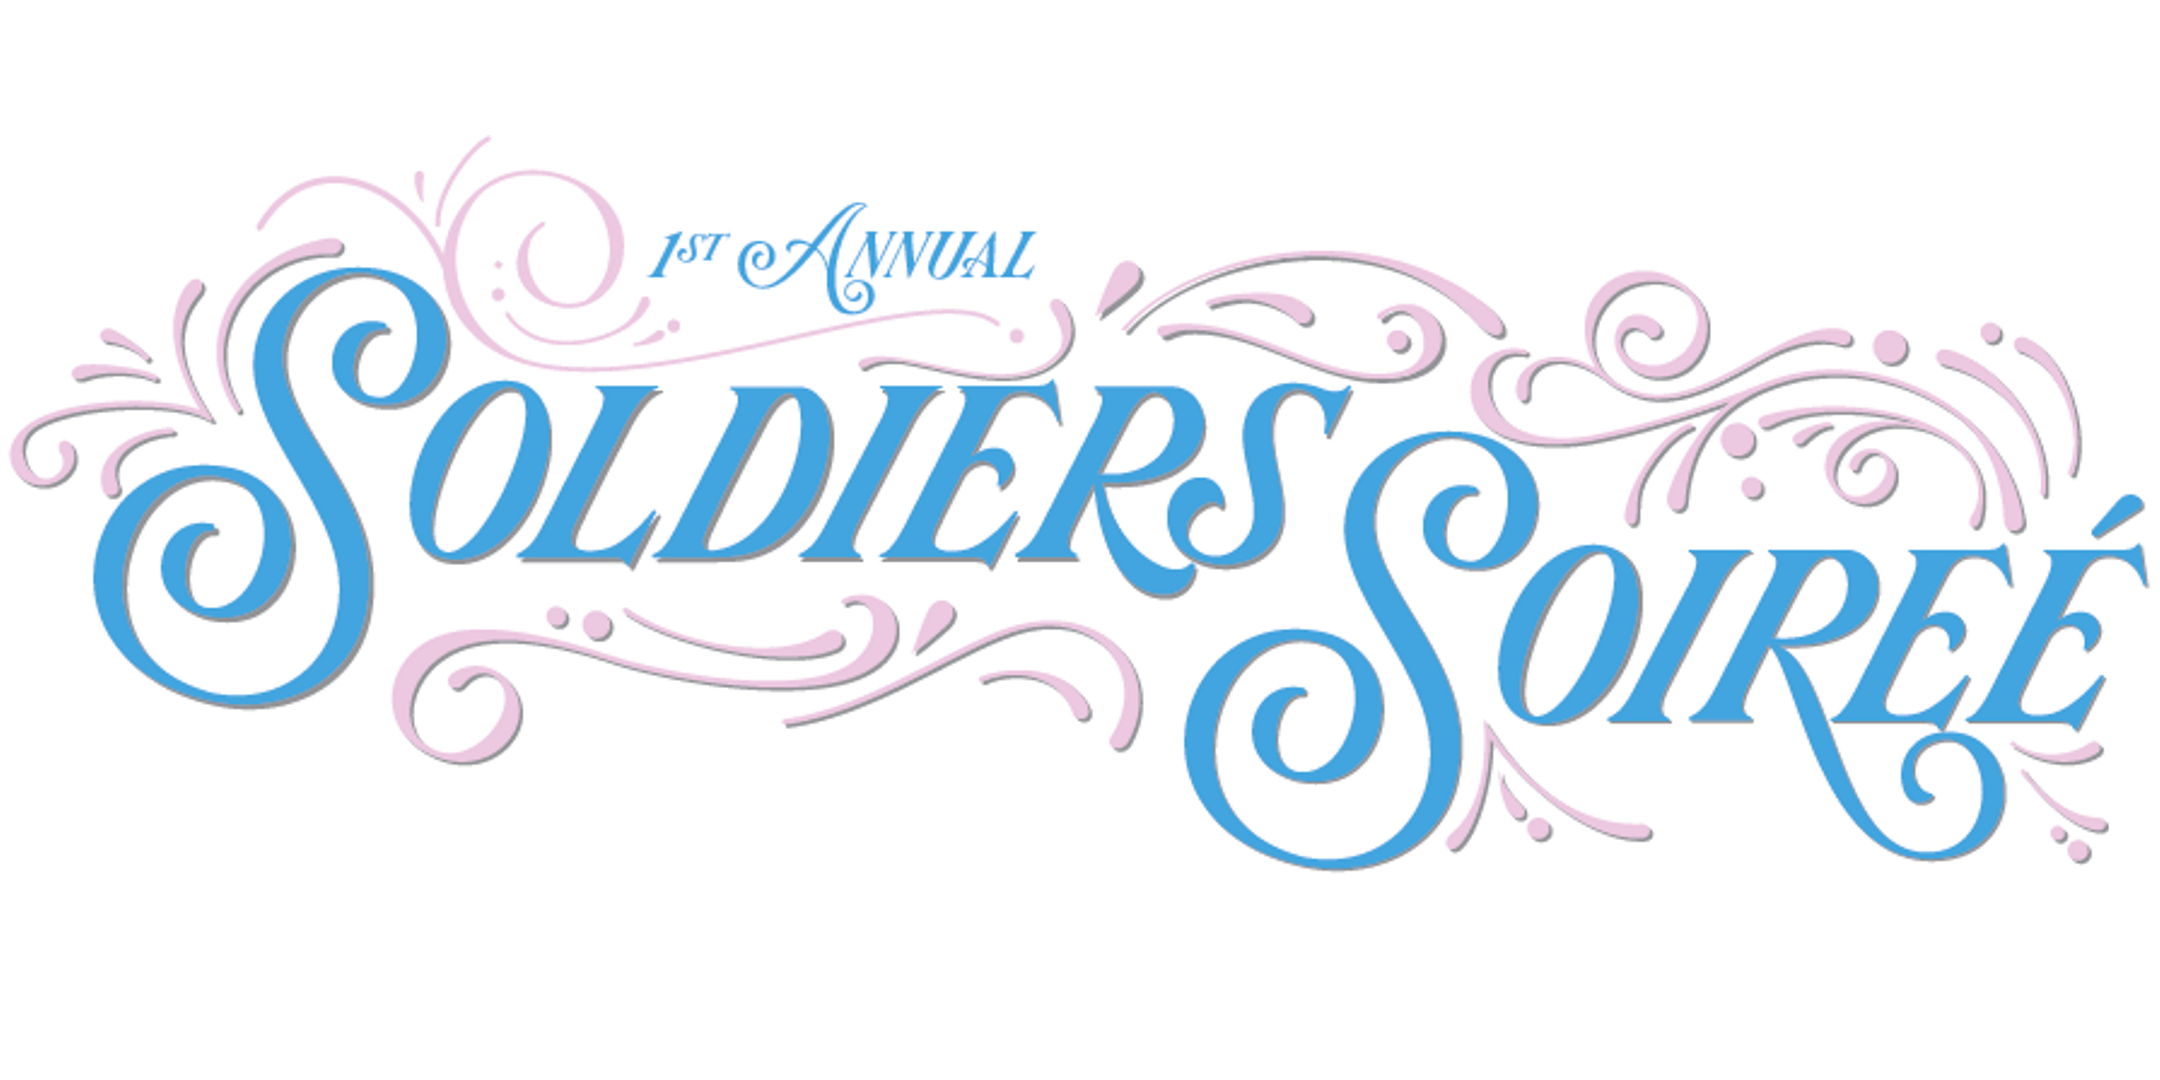 Soldiers Soiree